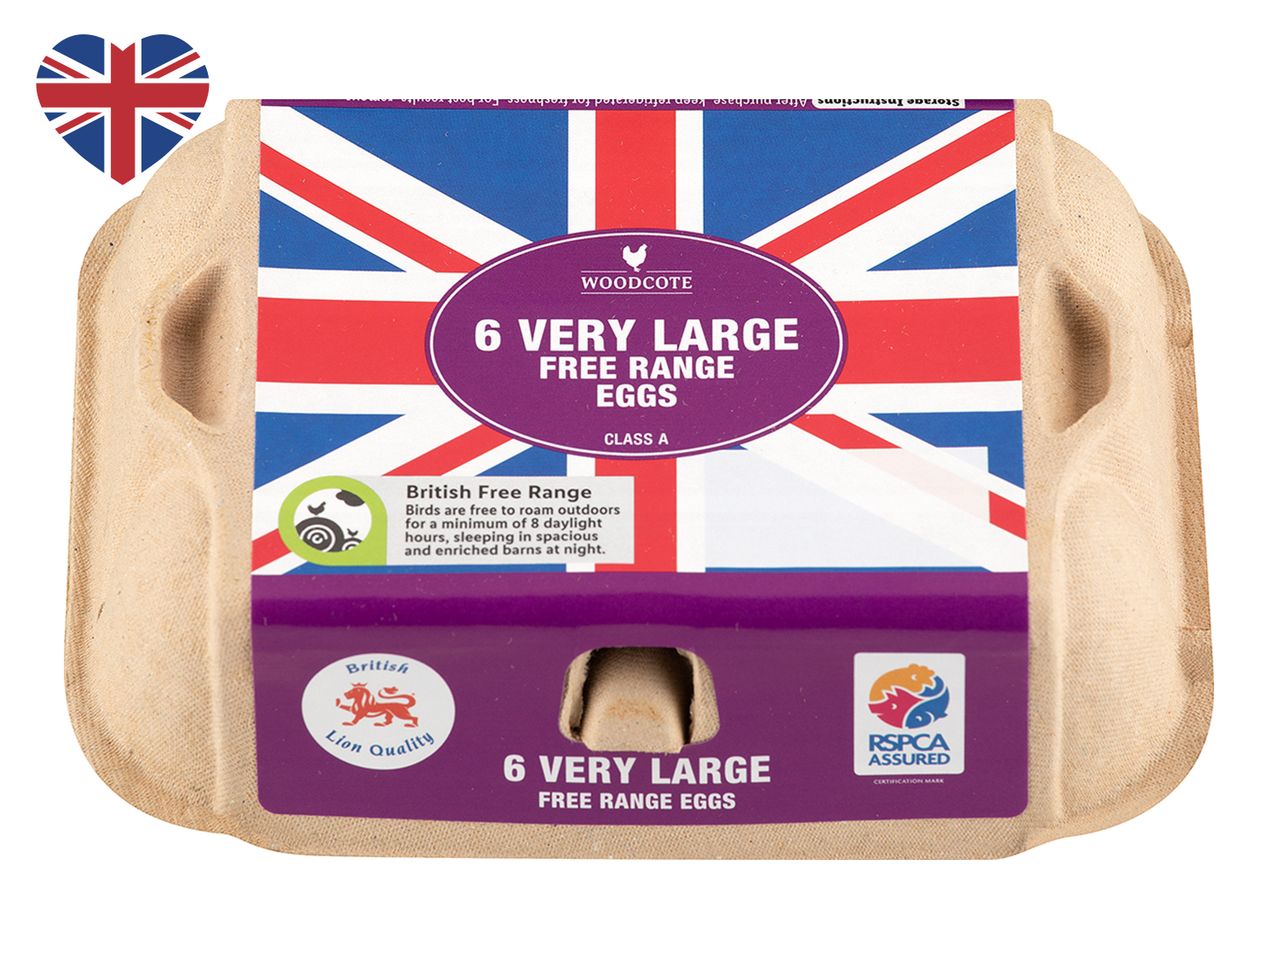 Go to full screen view: Woodcote 6 Very Large Free Range Eggs - Image 1